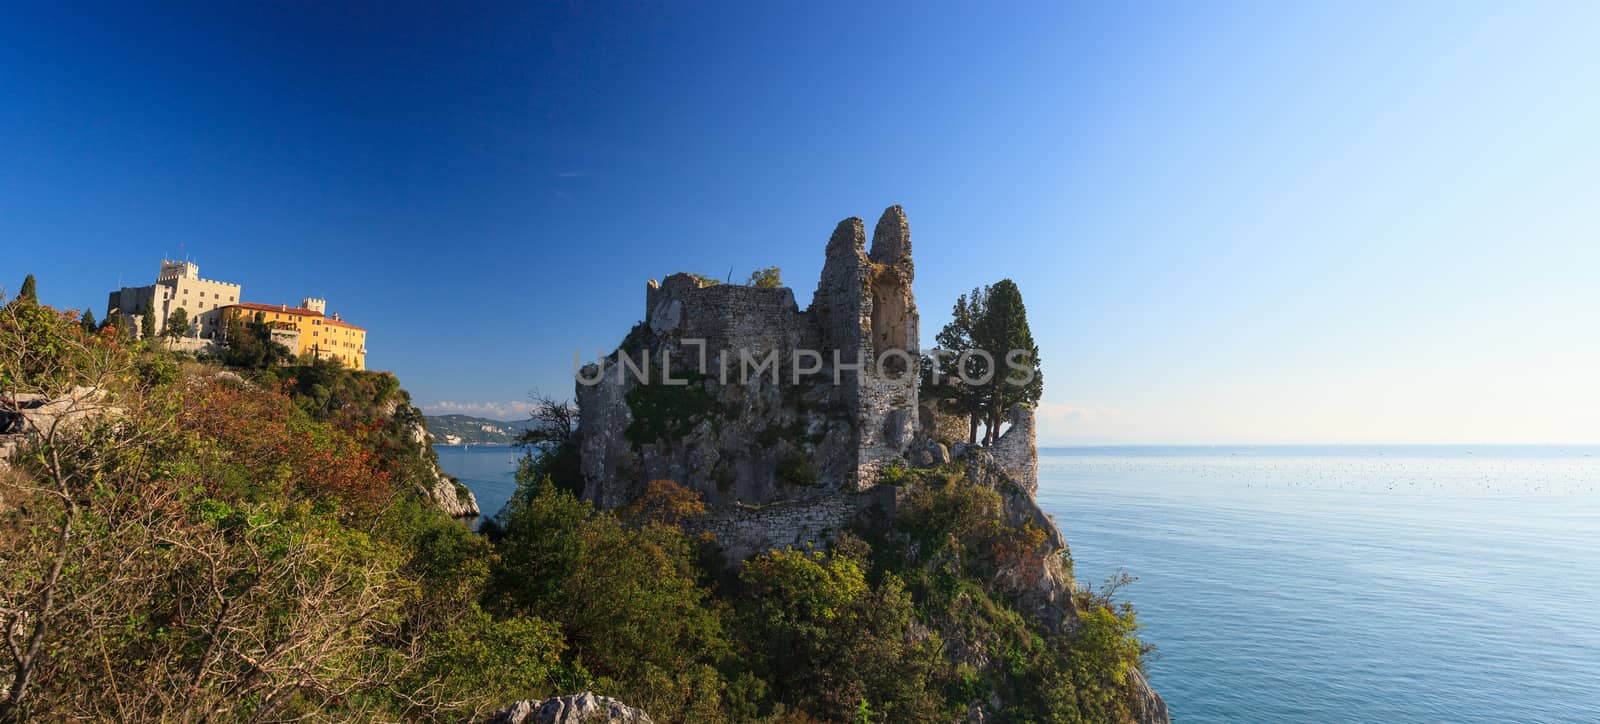 View of old and new castle in Duino, Italy